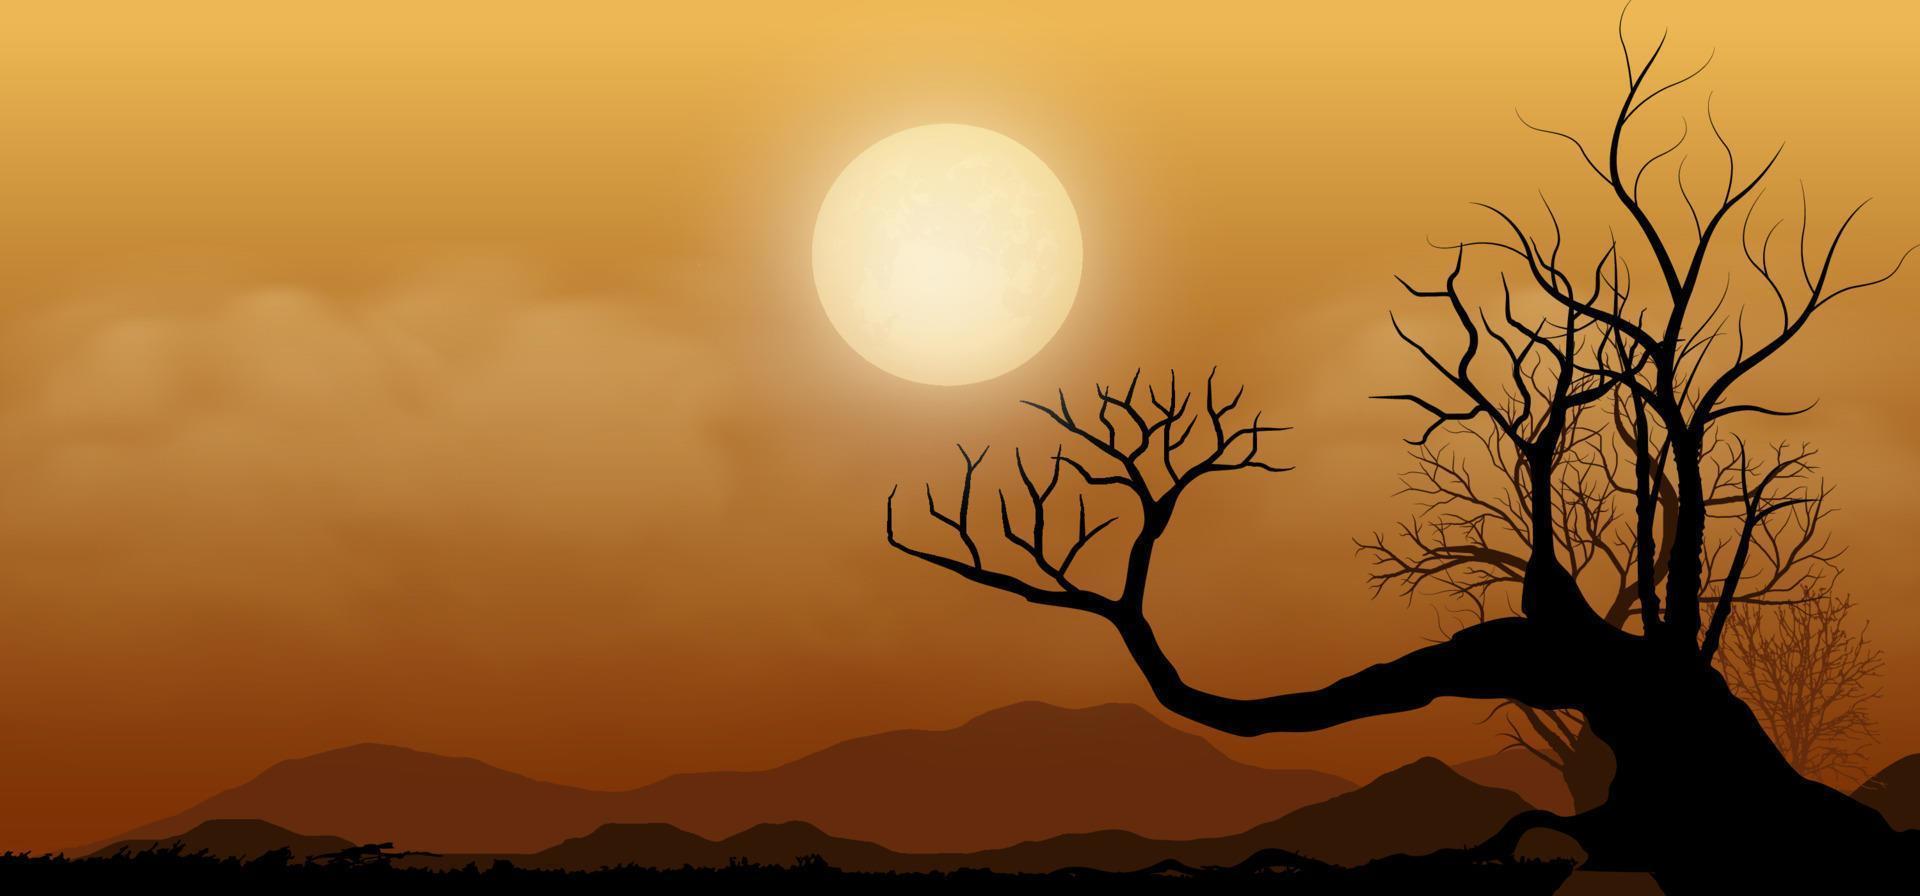 Sunset or full moon in African vector